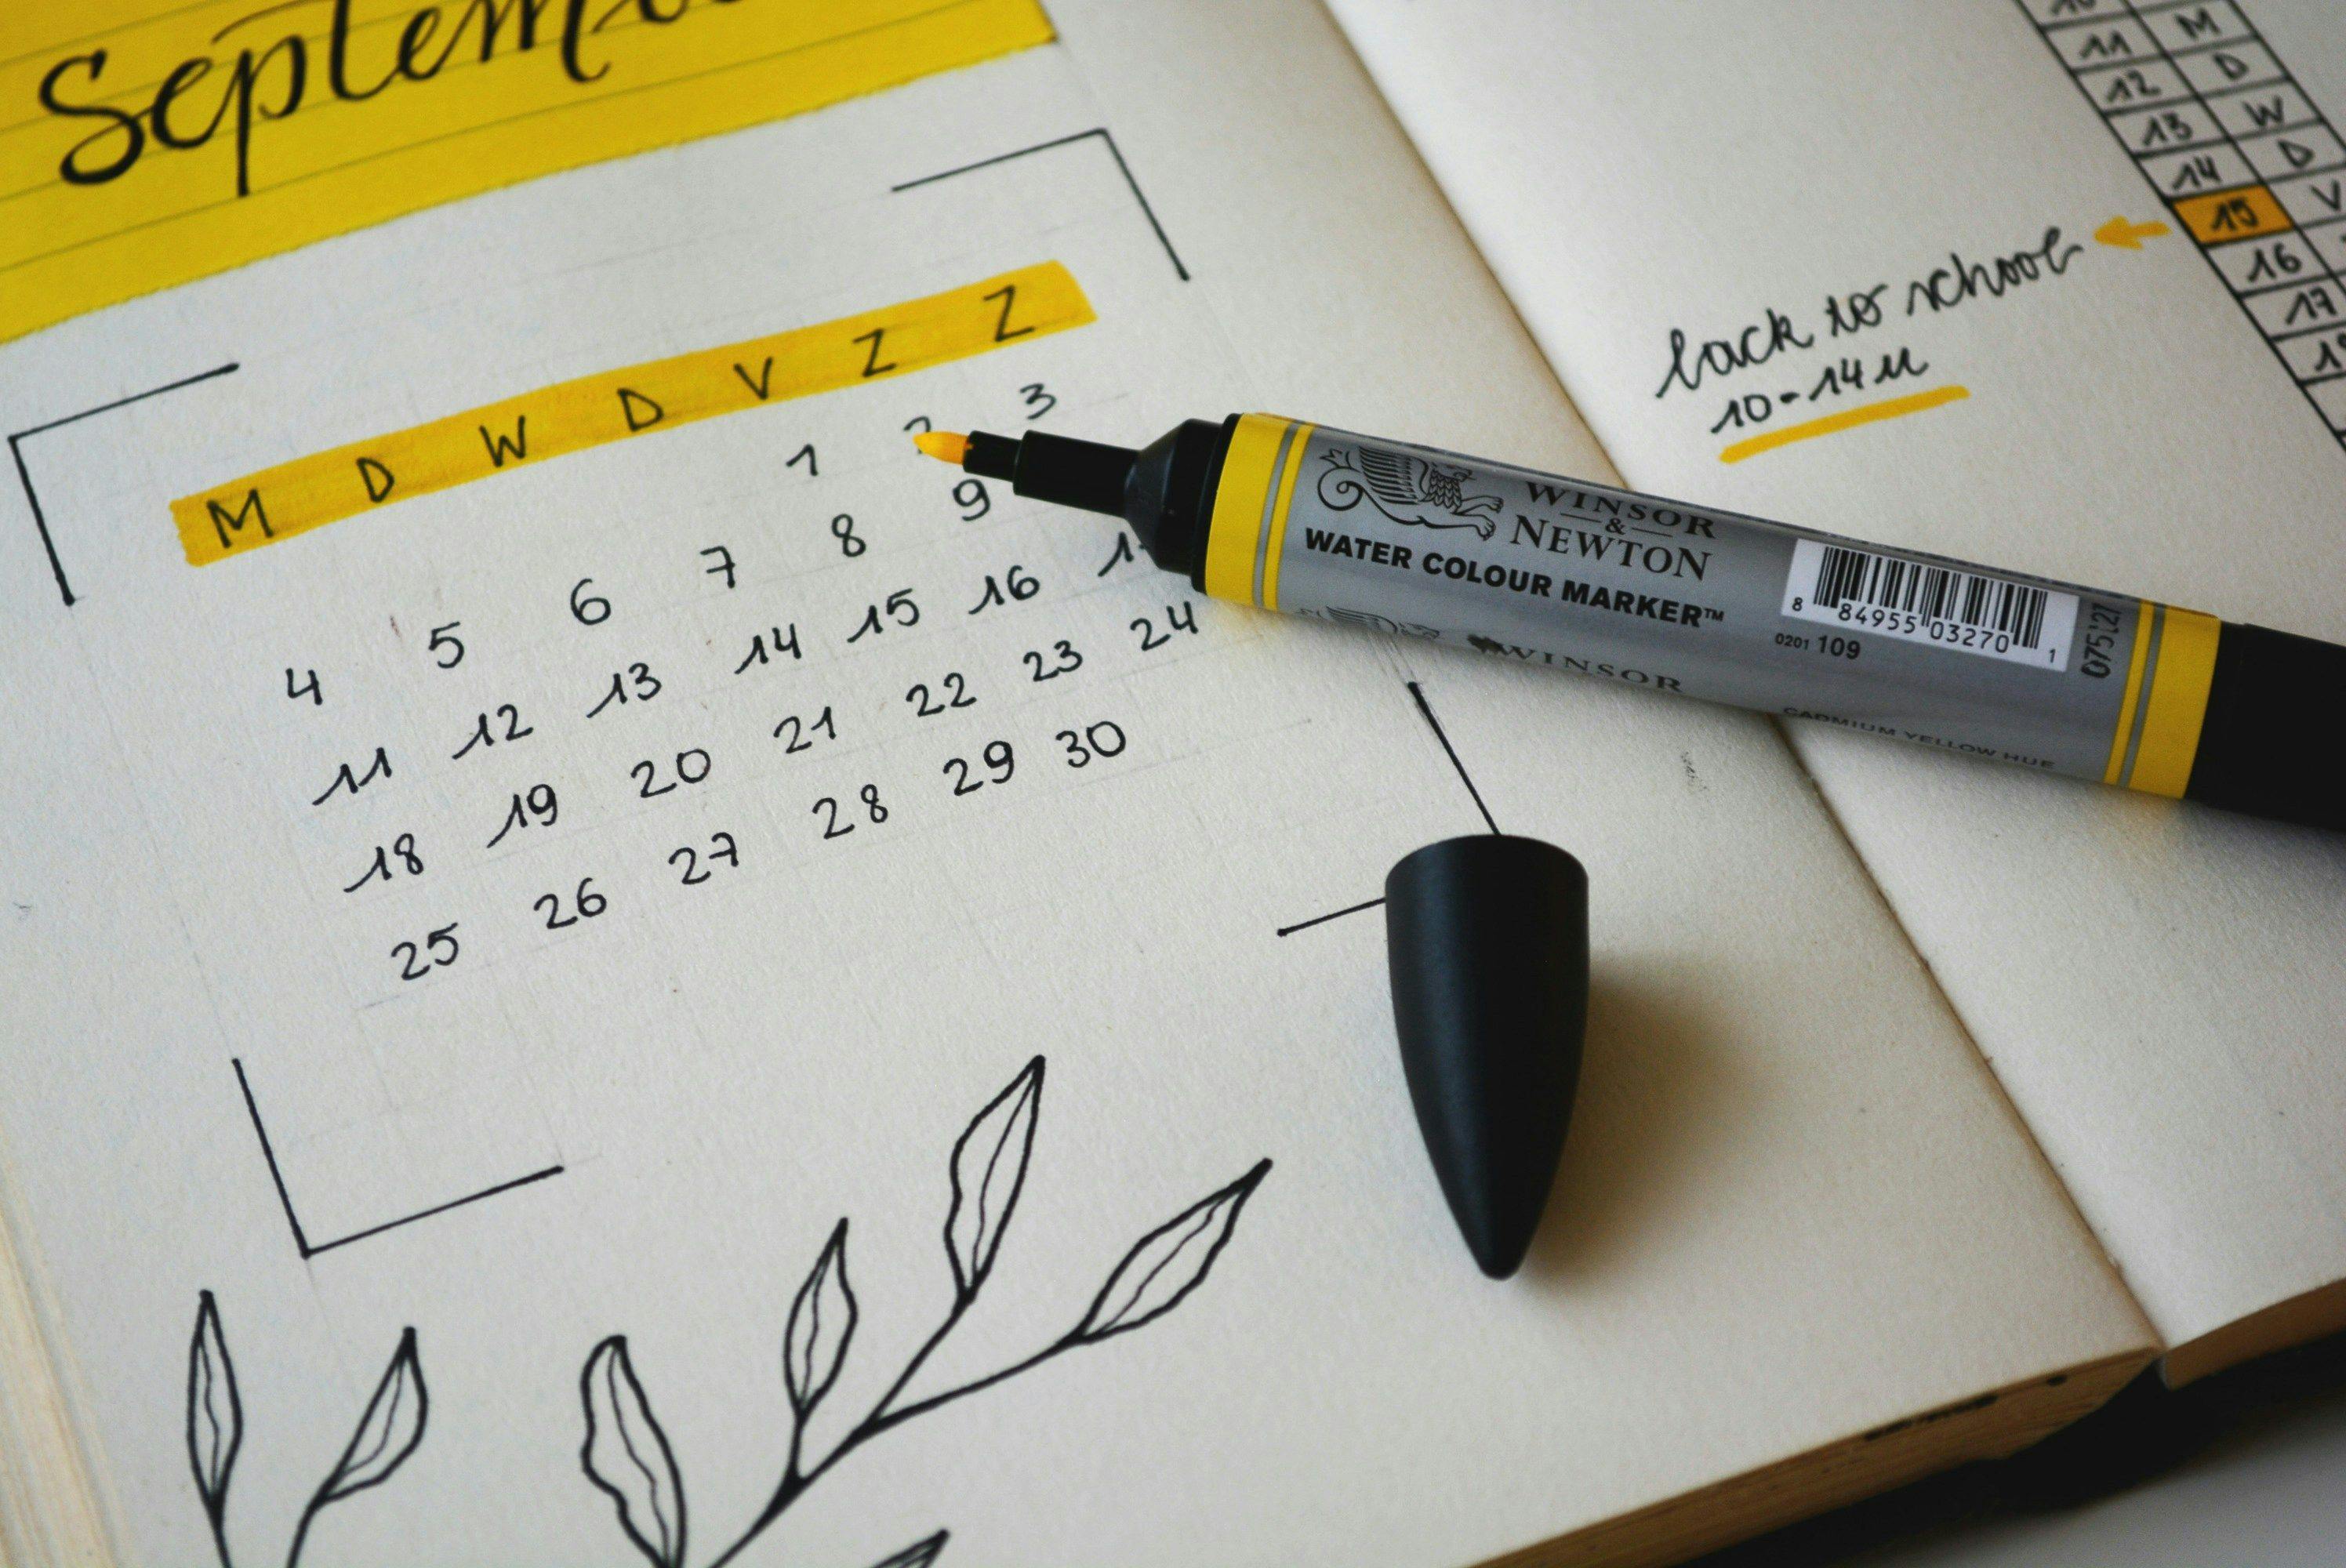 A detailed bullet journal spread showing a hand-drawn September calendar with a yellow watercolor marker and a reminder for a restaurant reservation in New York, emphasizing personal organization and the anticipation of dining out.